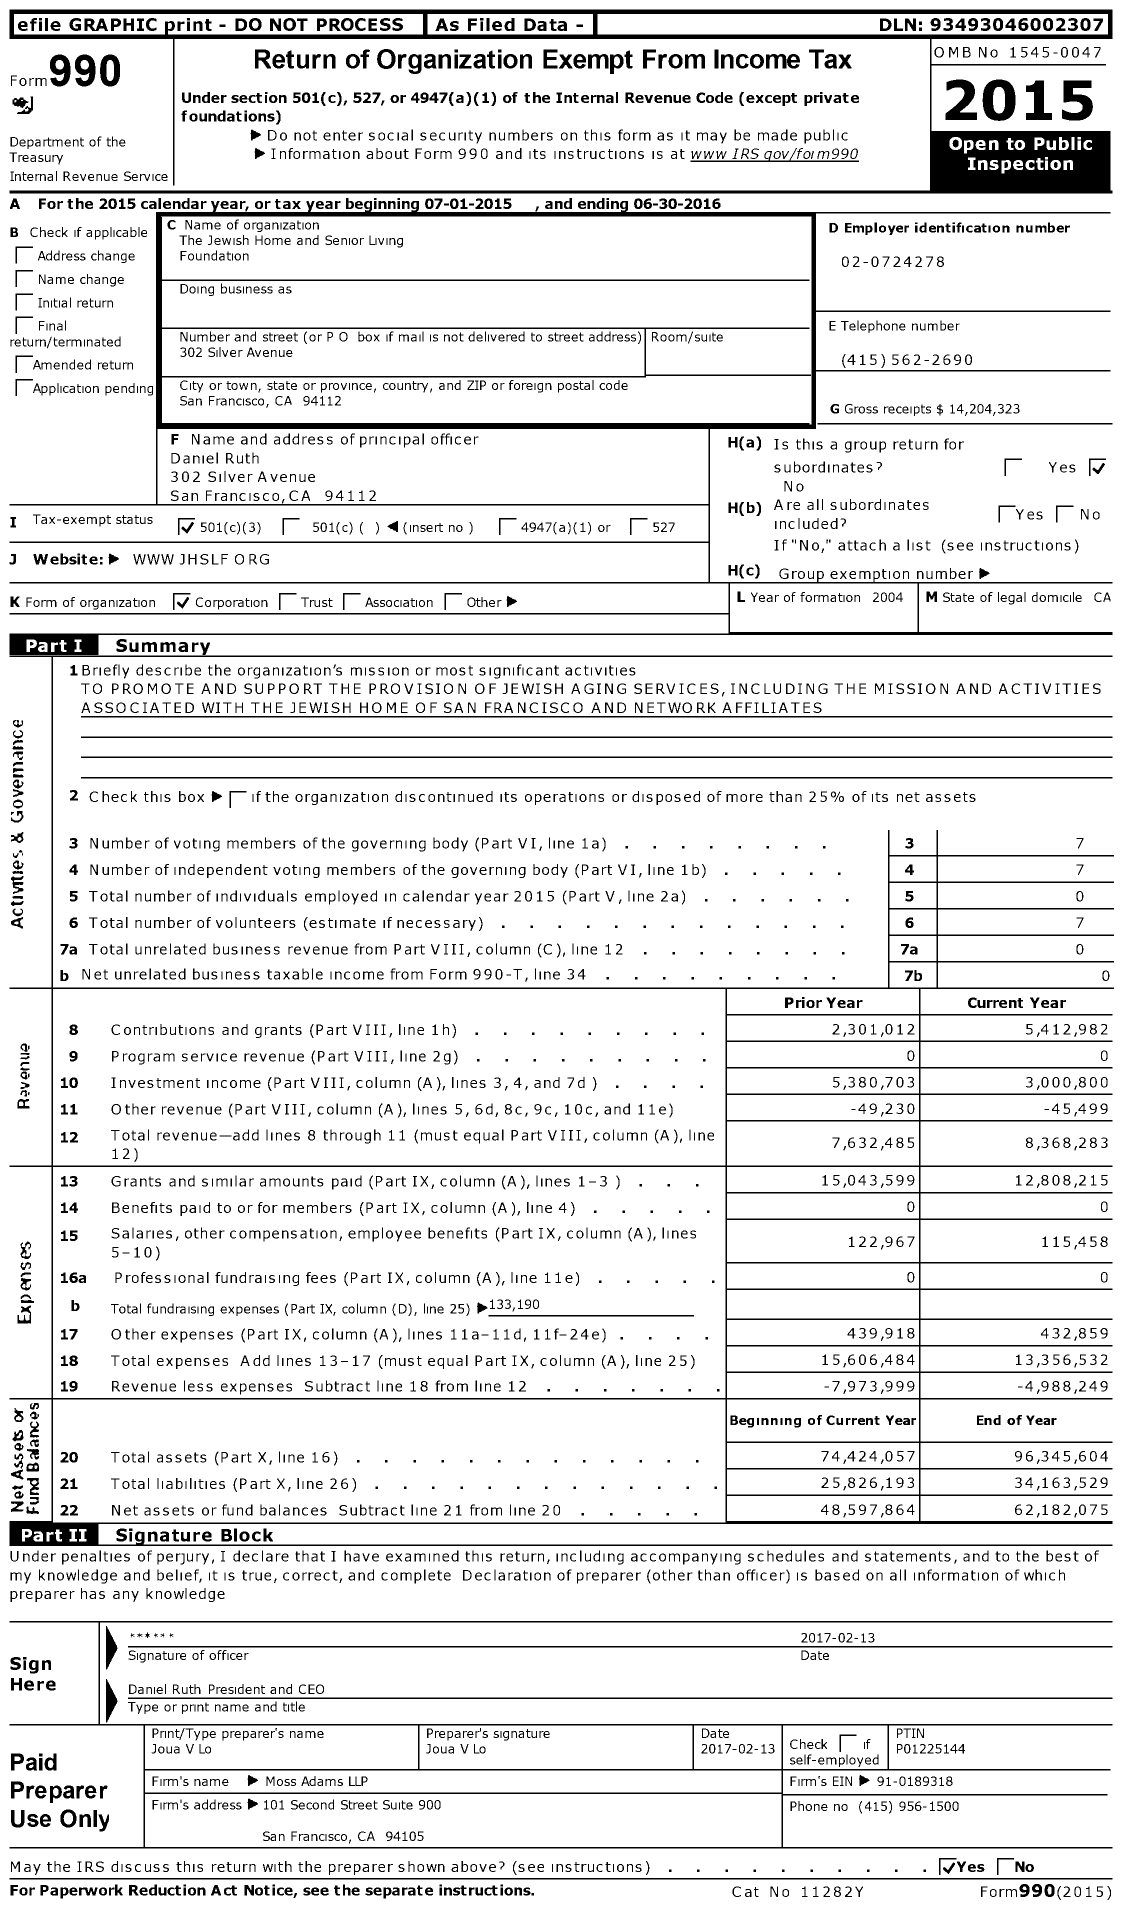 Image of first page of 2015 Form 990 for The Jewish Home and Senior Living Foundation (JHSLF)